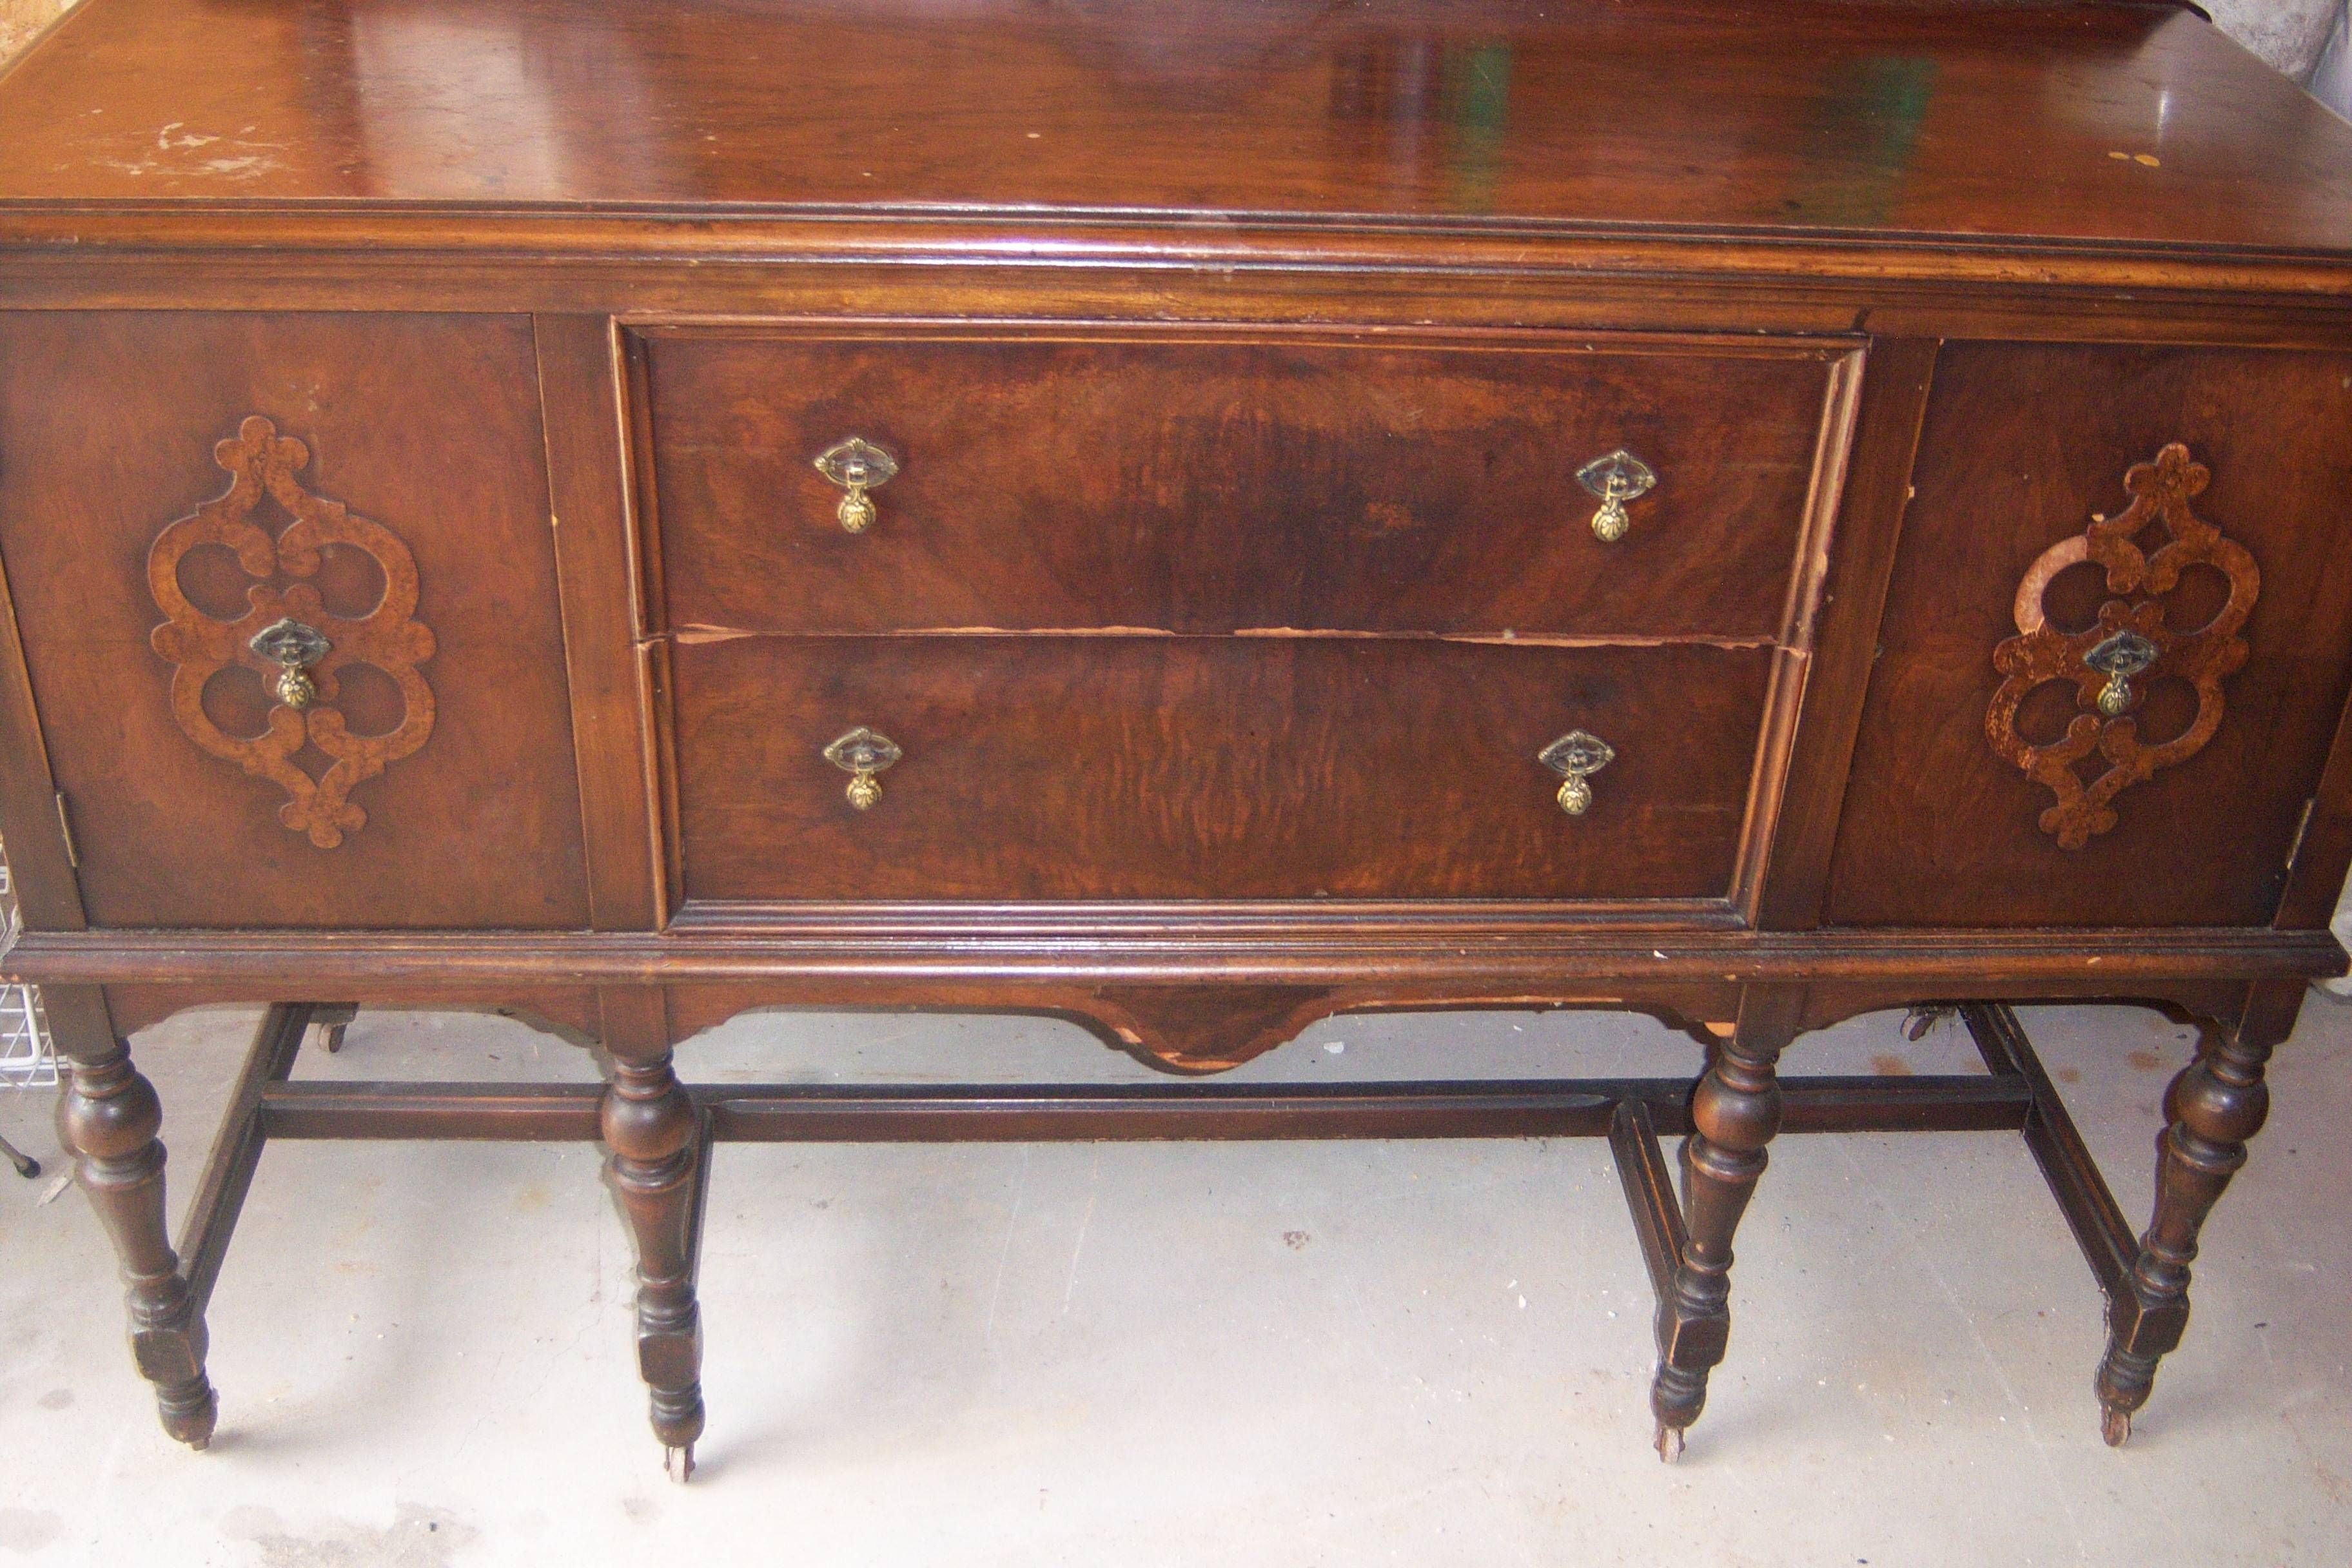 Elegant Antique Sideboards For Sale – Bjdgjy Within Recent Wooden Sideboards For Sale (Photo 3 of 15)